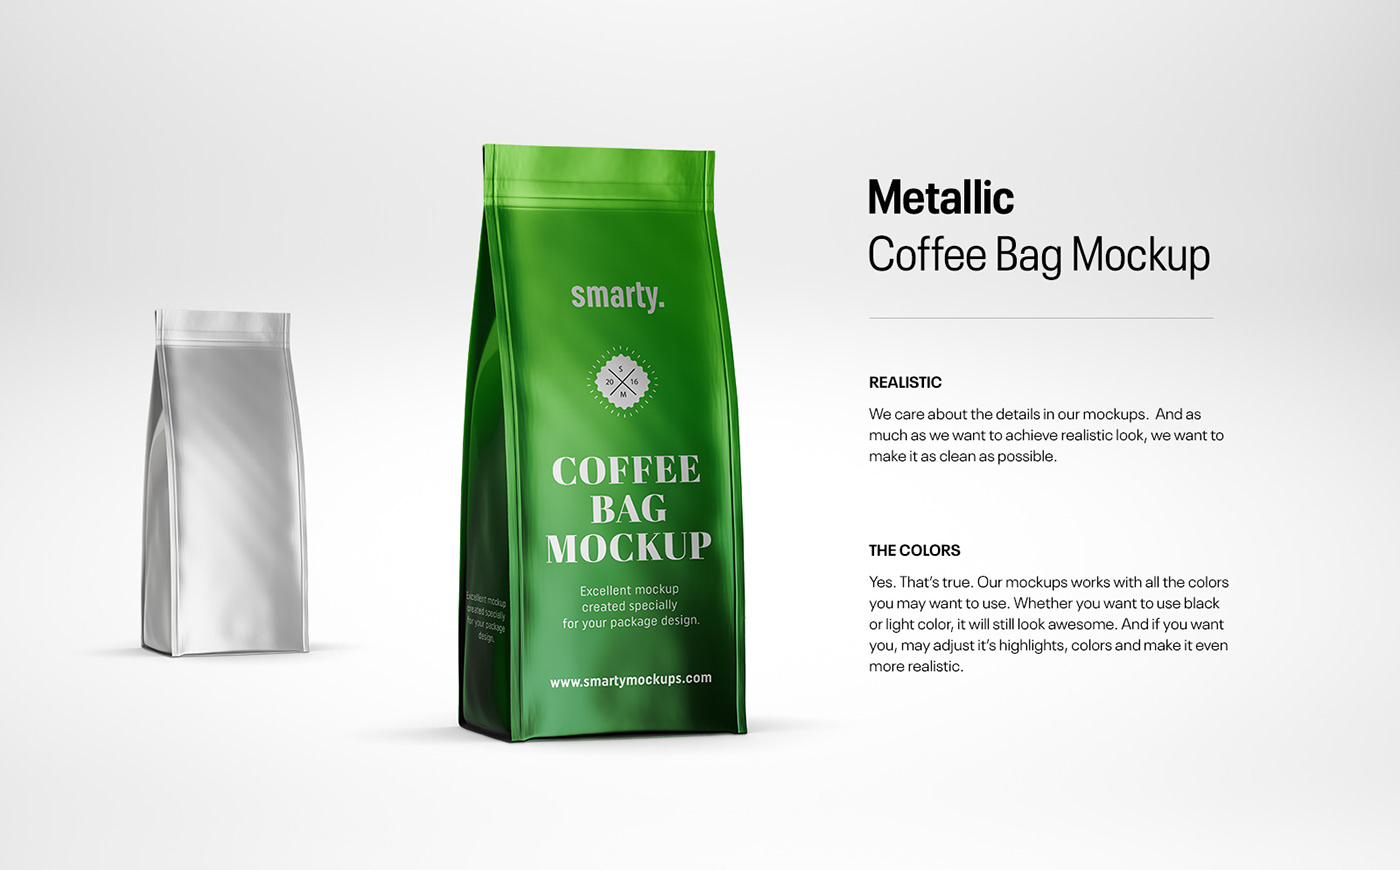 Coffee bag pouch doypack Mockup psd photoshop template download